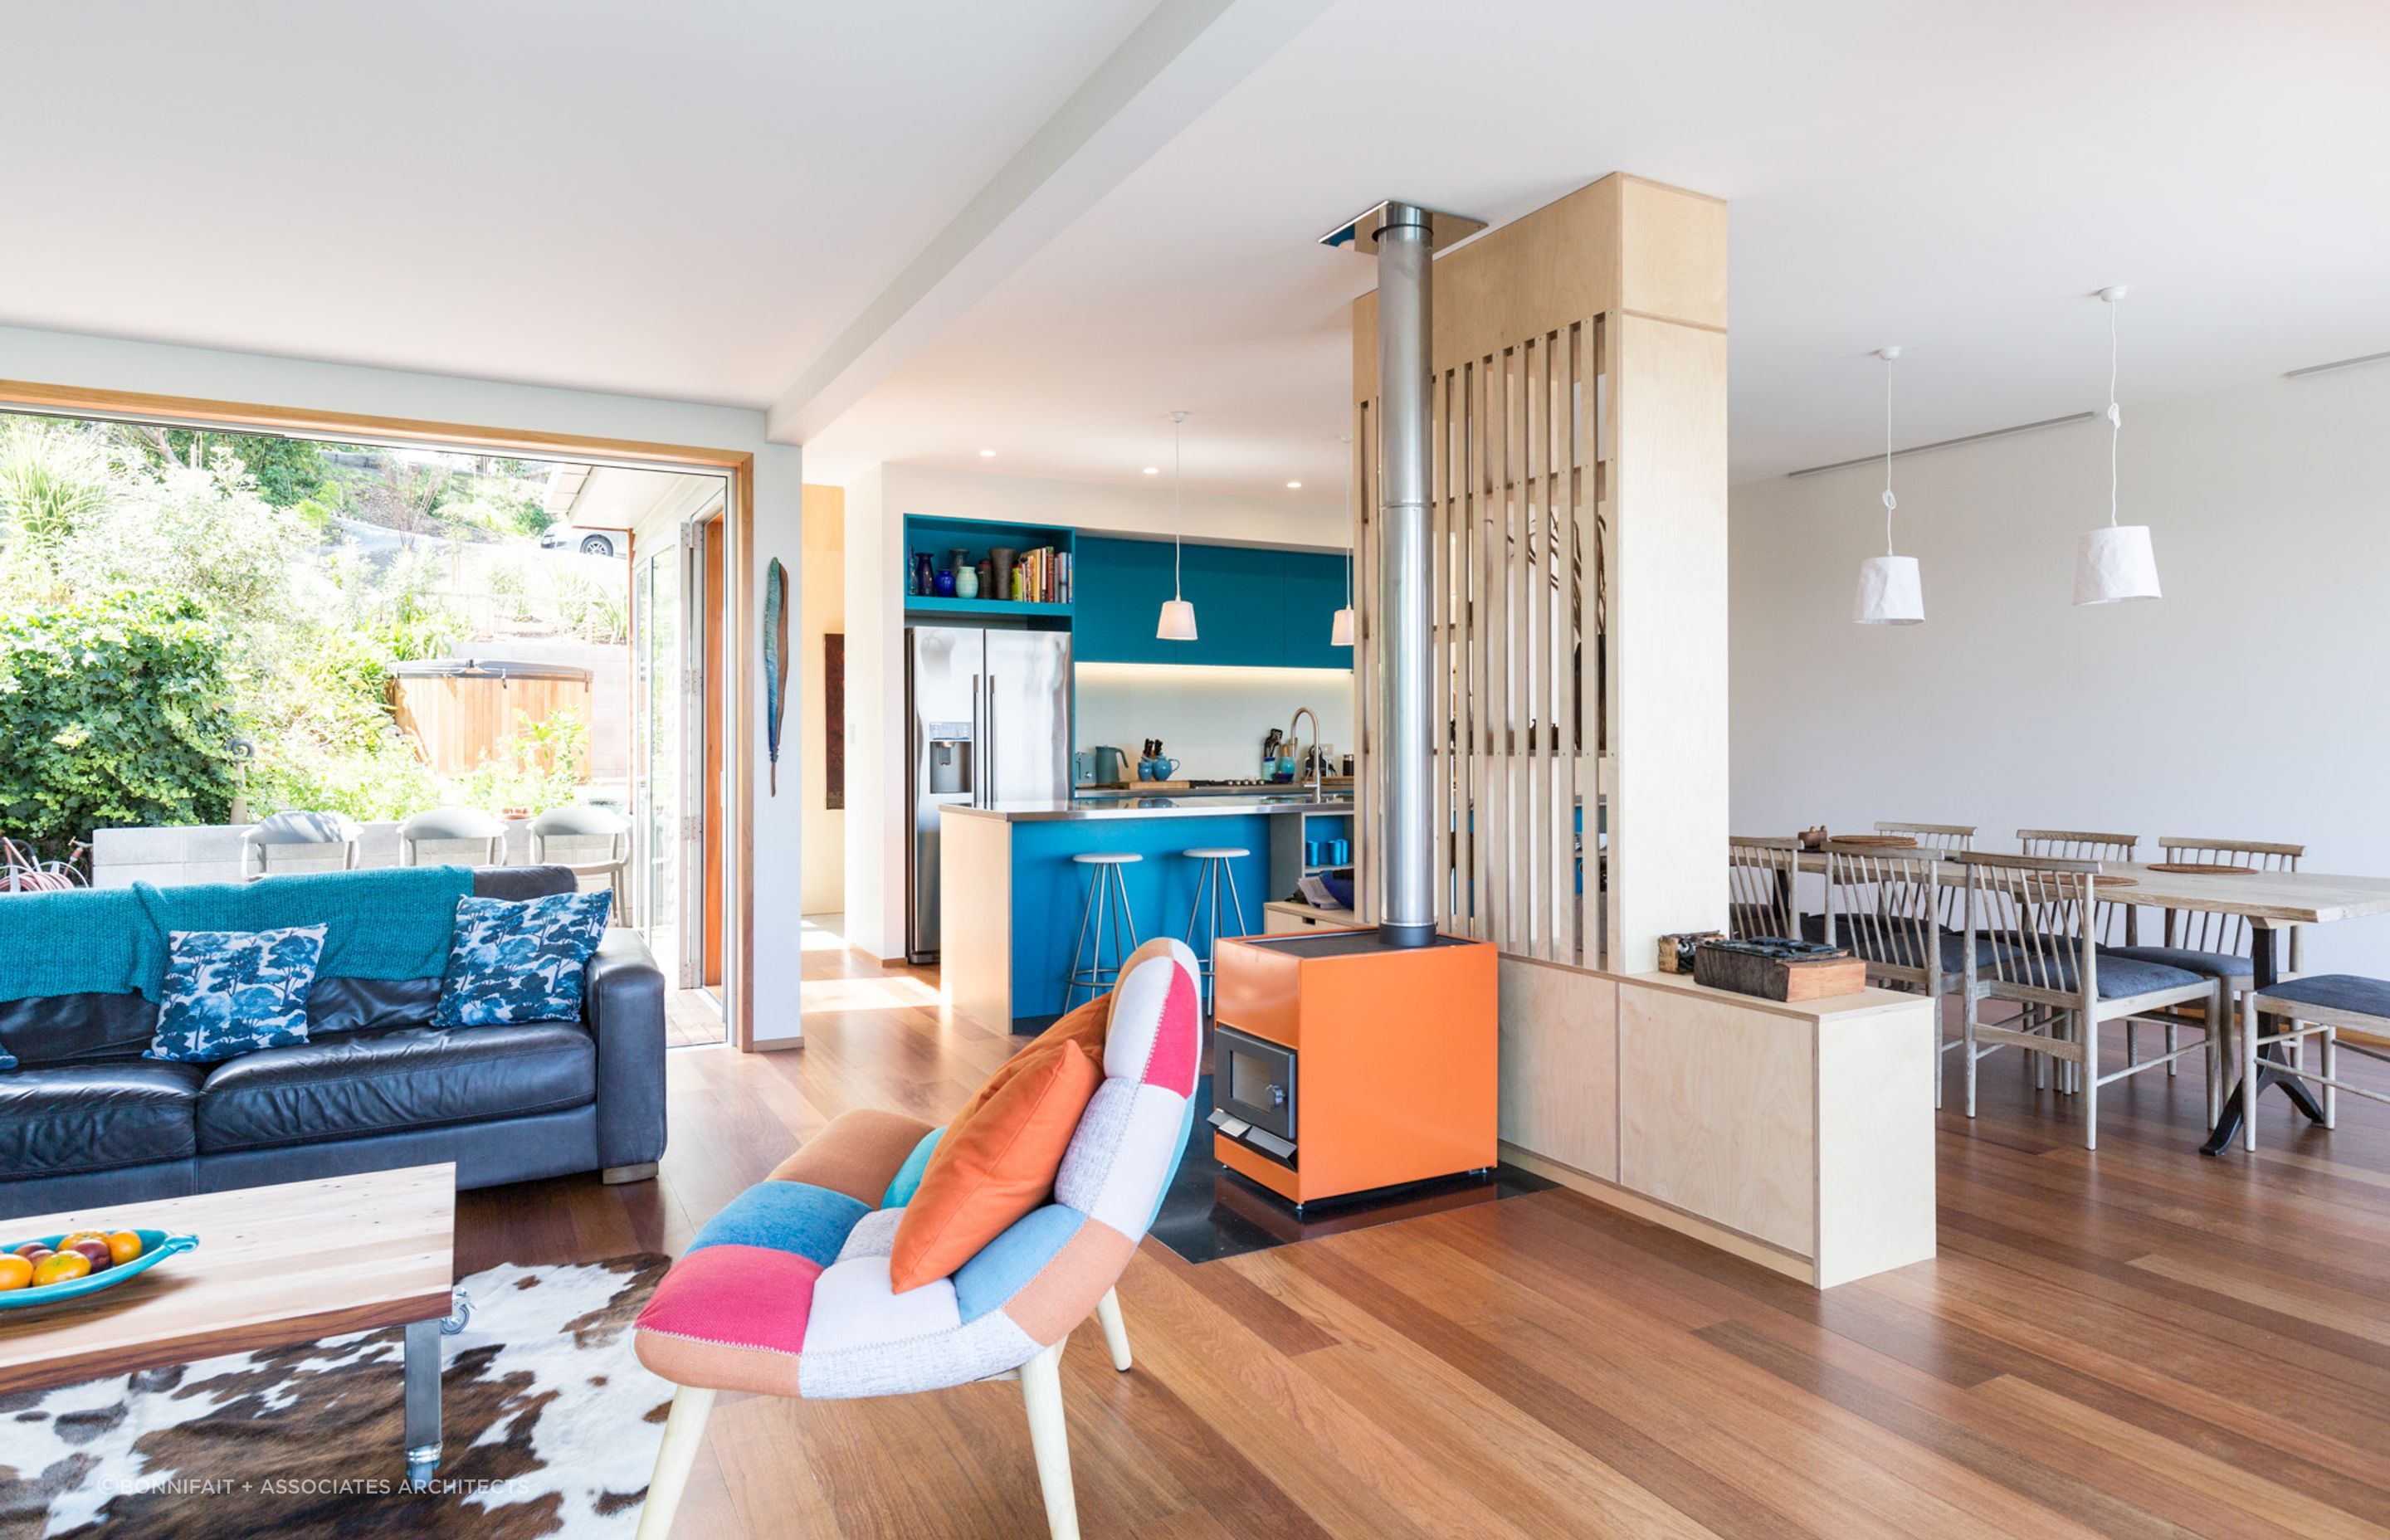 Colourful furnishings and an abundance of natural light grace the interiors. | Photography: Russell Kleyn